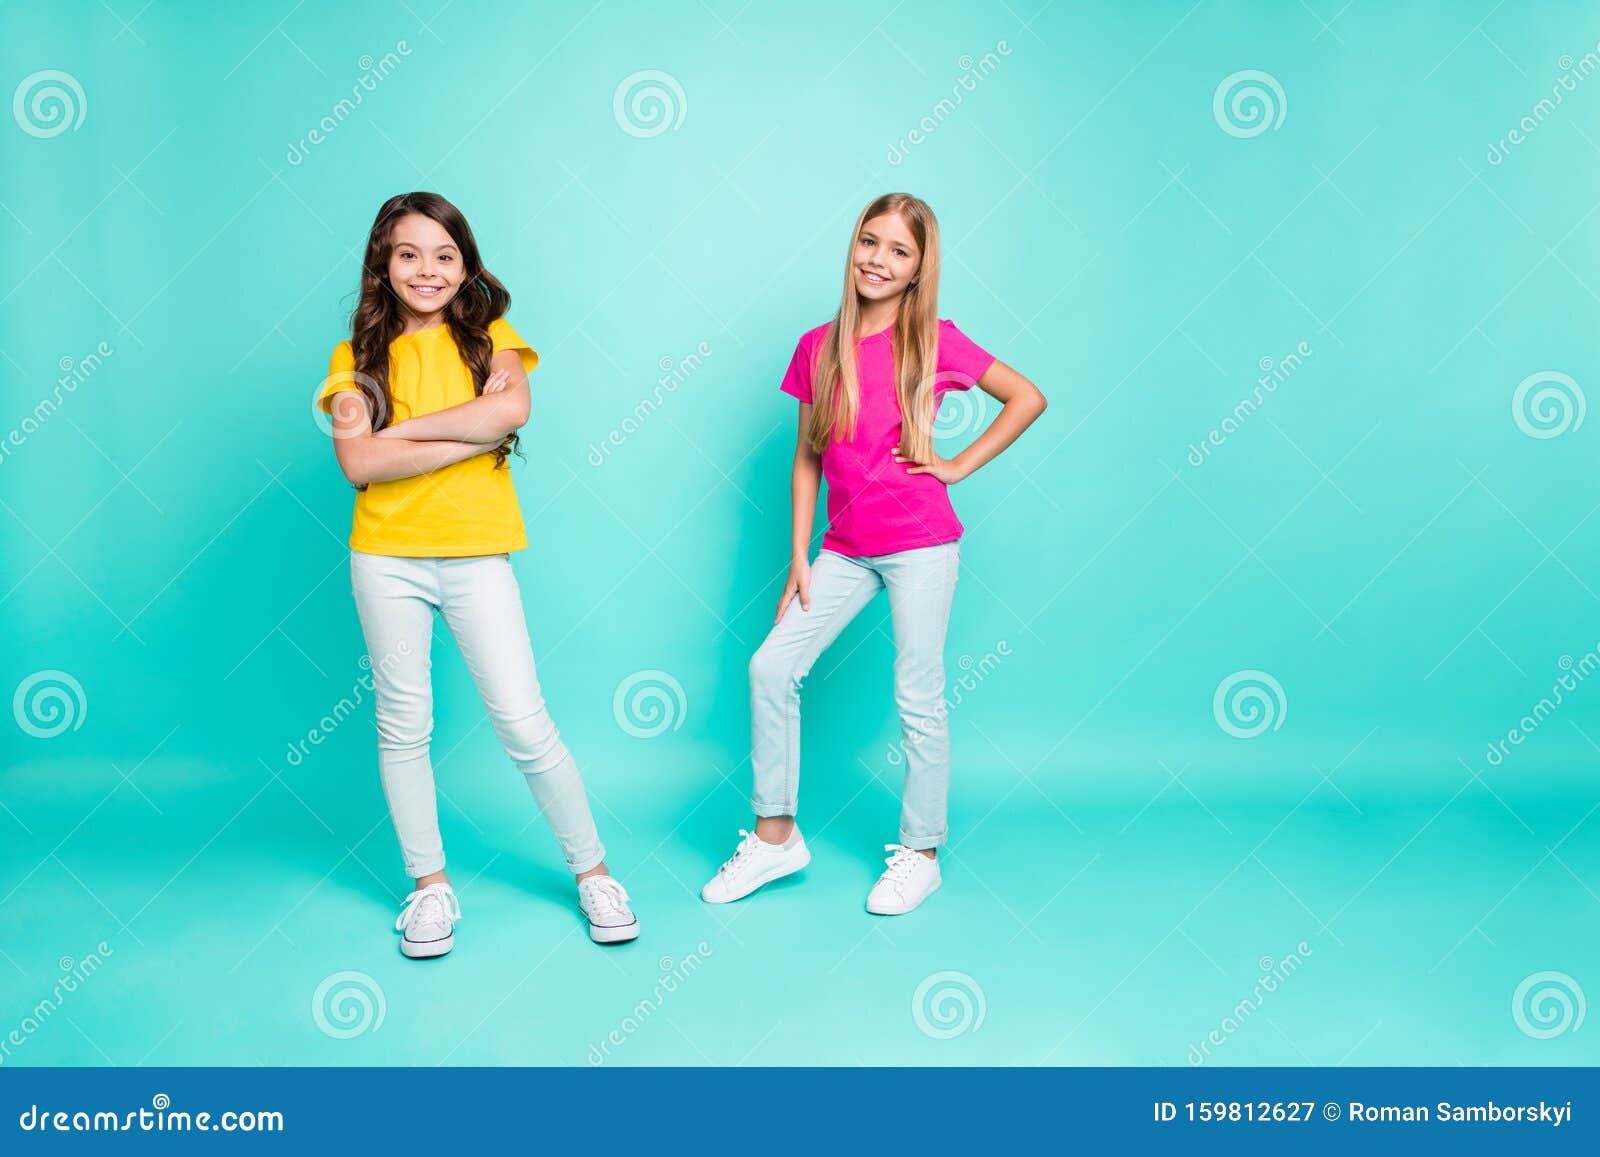 Two Young Models